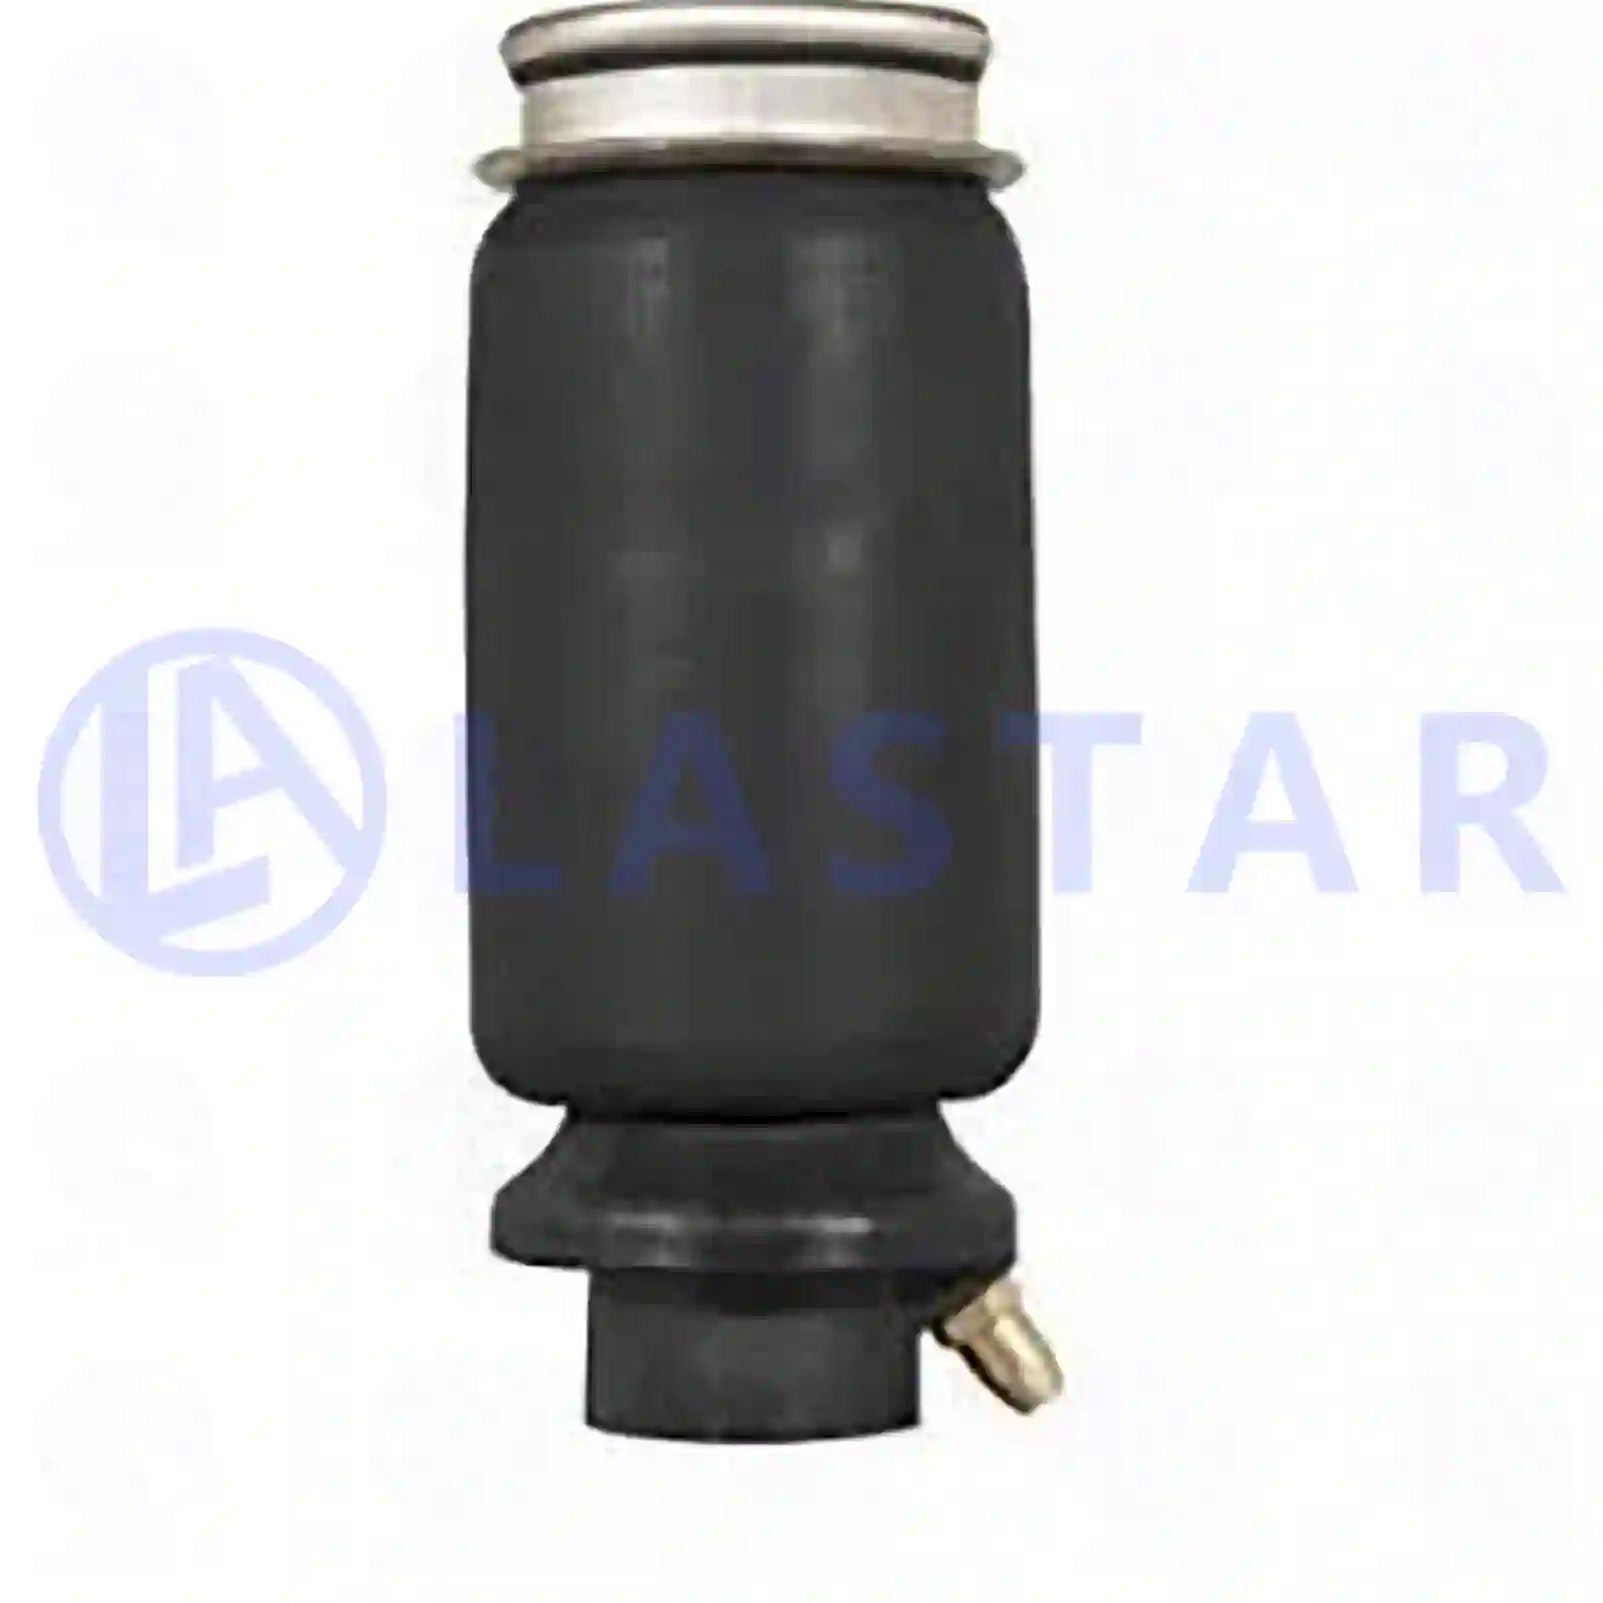 Air bellow, cabin shock absorber, 77735329, 1502468, 2477273, 502468, ZG40694-0008 ||  77735329 Lastar Spare Part | Truck Spare Parts, Auotomotive Spare Parts Air bellow, cabin shock absorber, 77735329, 1502468, 2477273, 502468, ZG40694-0008 ||  77735329 Lastar Spare Part | Truck Spare Parts, Auotomotive Spare Parts